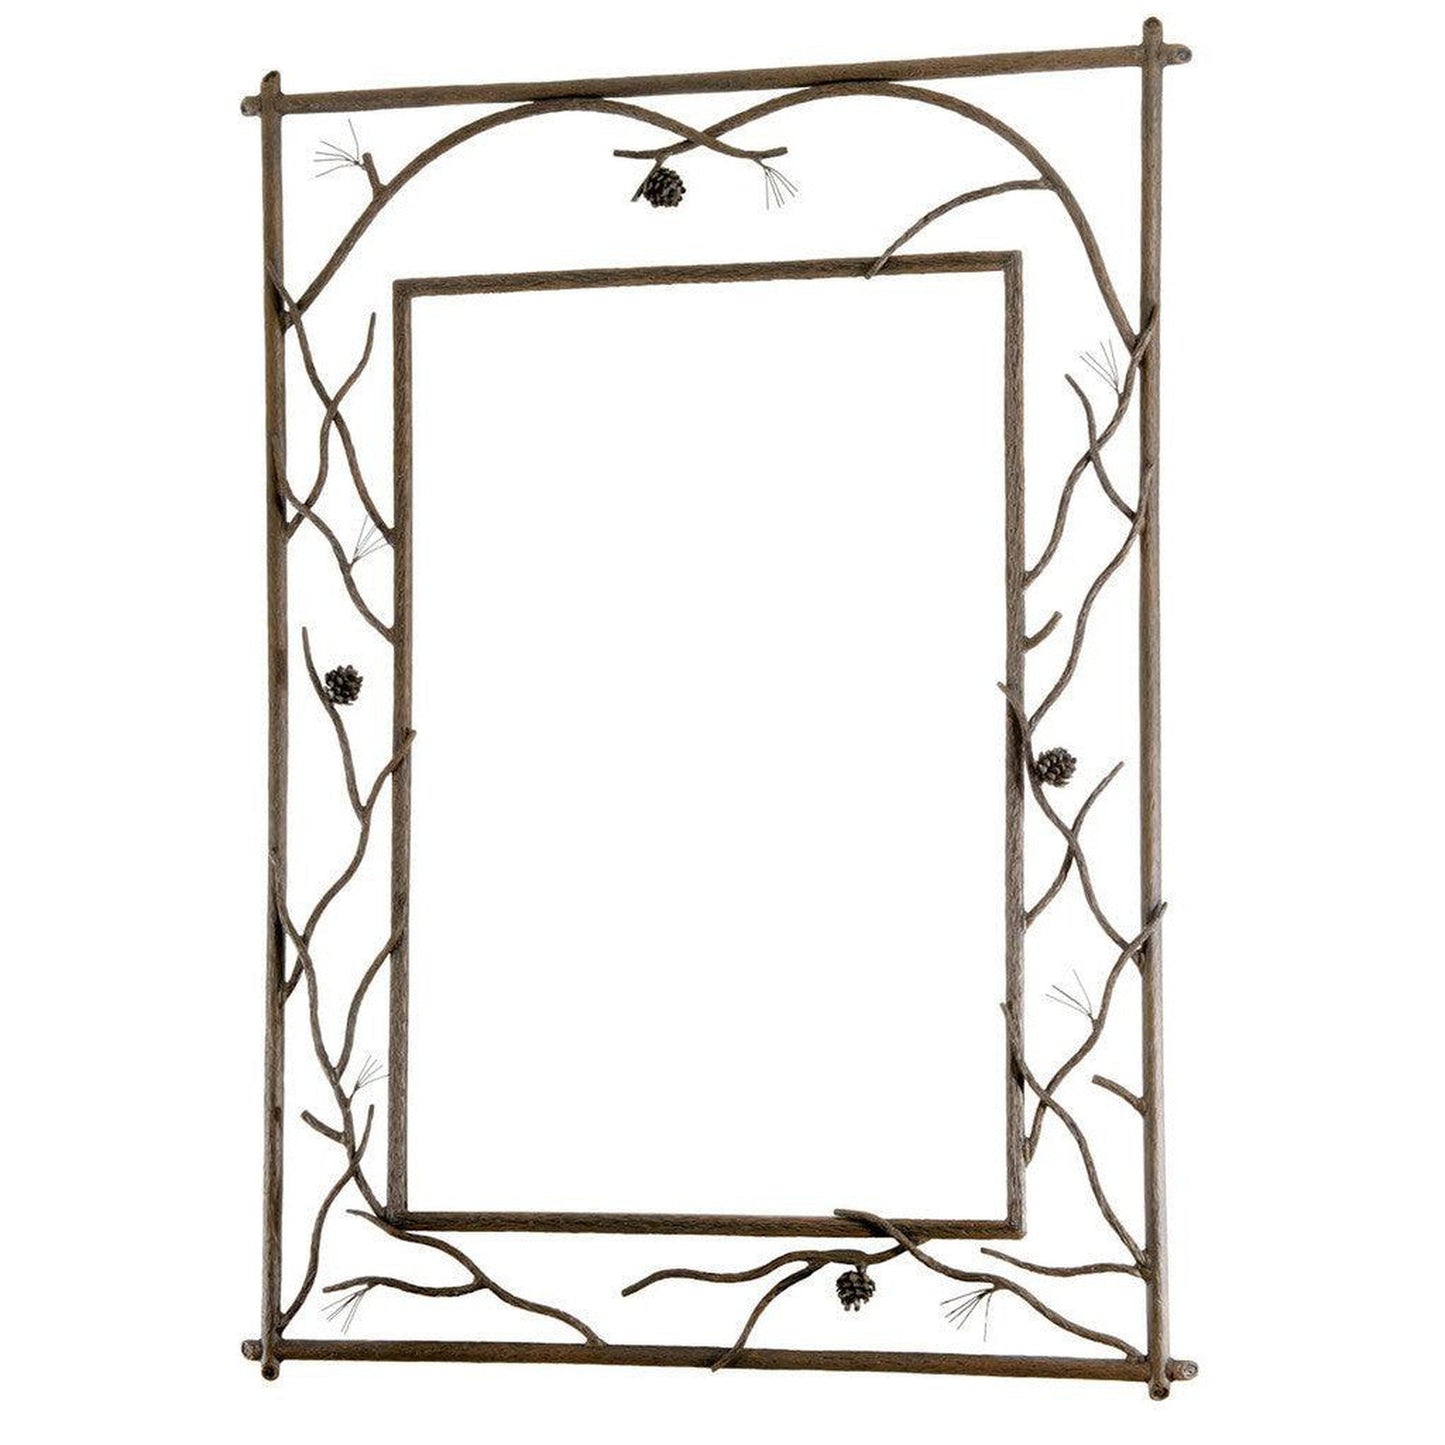 Stone County Ironworks Pine 37" x 51" Large Satin Black Branched Iron Wall Mirror